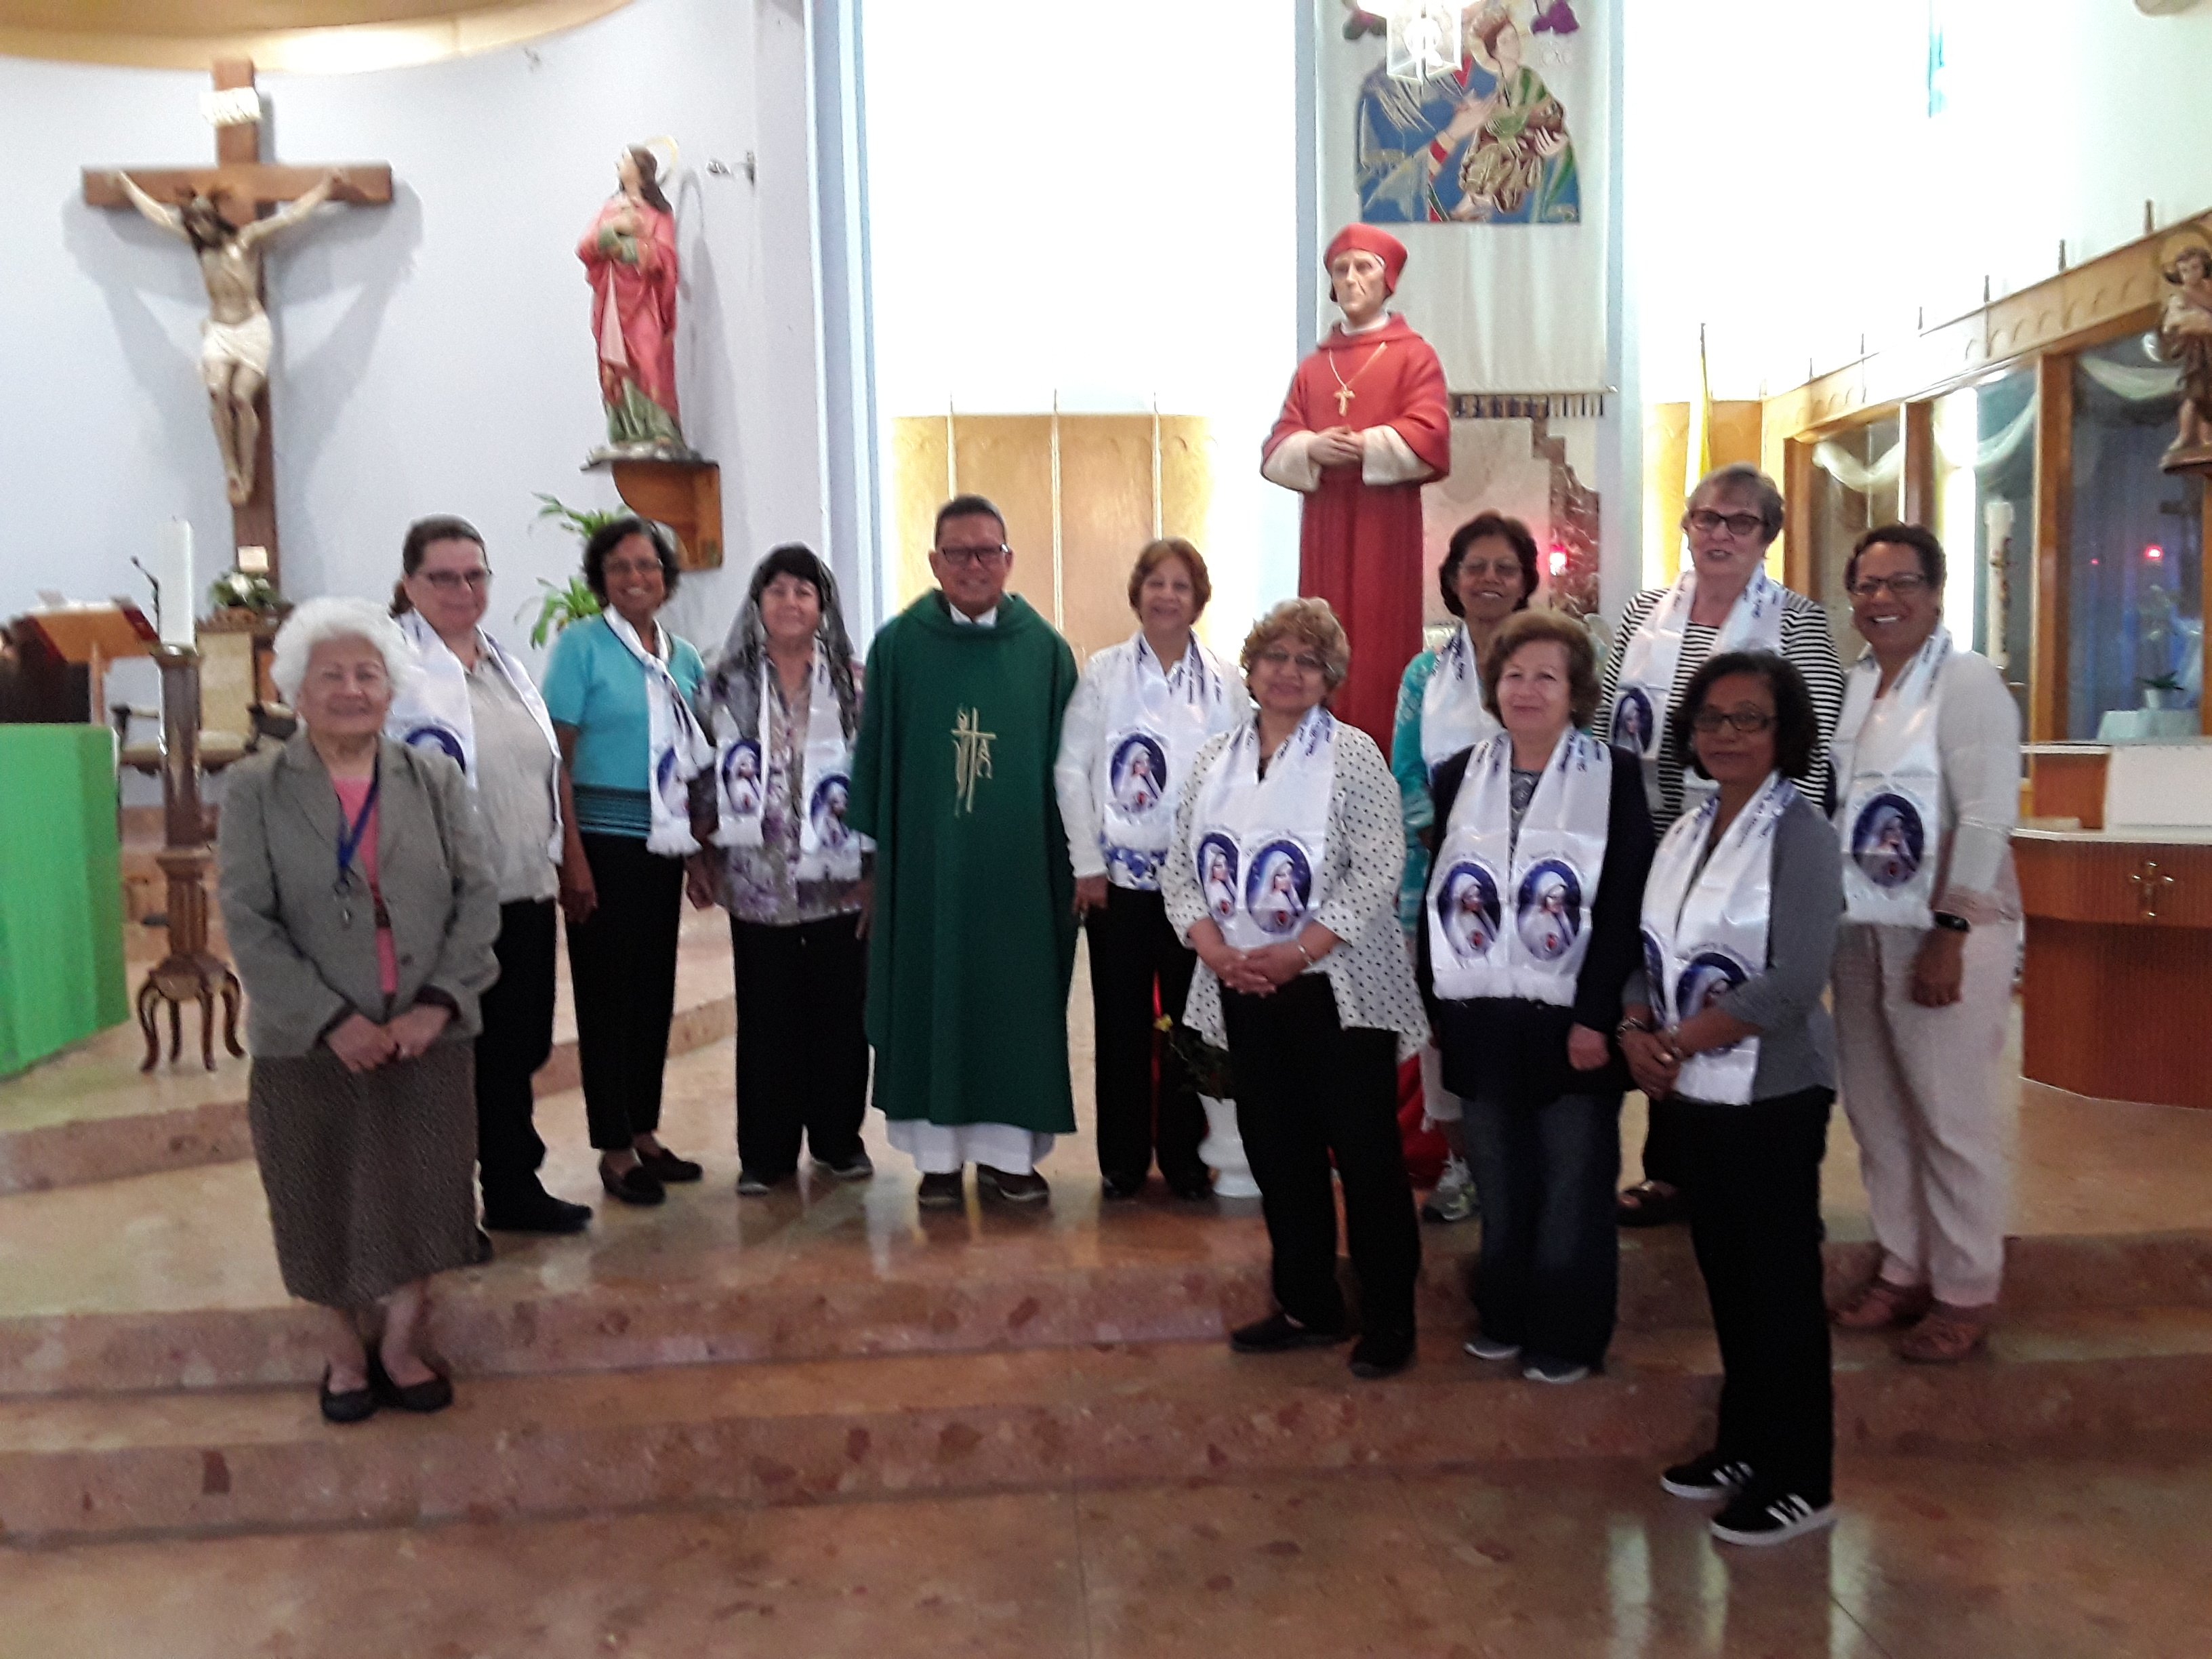 picture of the members of the Rosary Apostolate Group at St. John Fisher Church